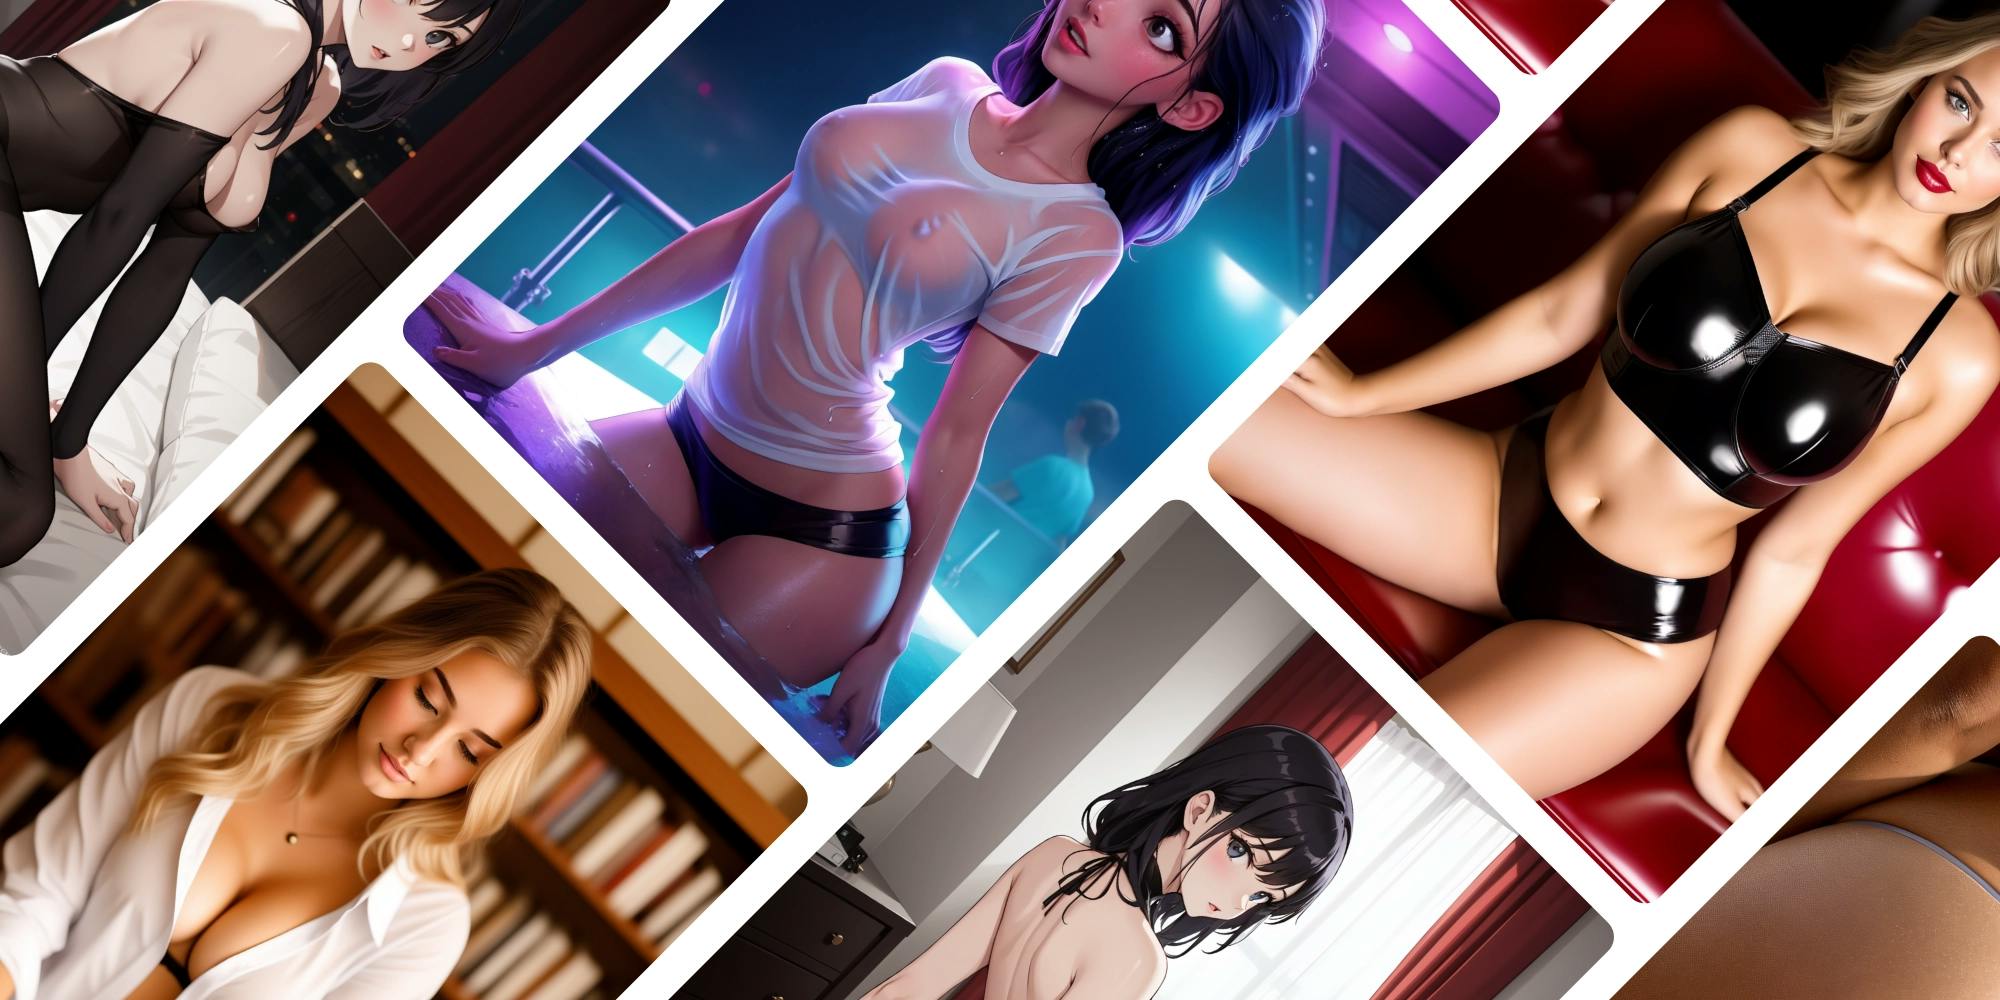 Cover Image for MAJOR UPDATE: New NSFW AI Models, Upscaling & More